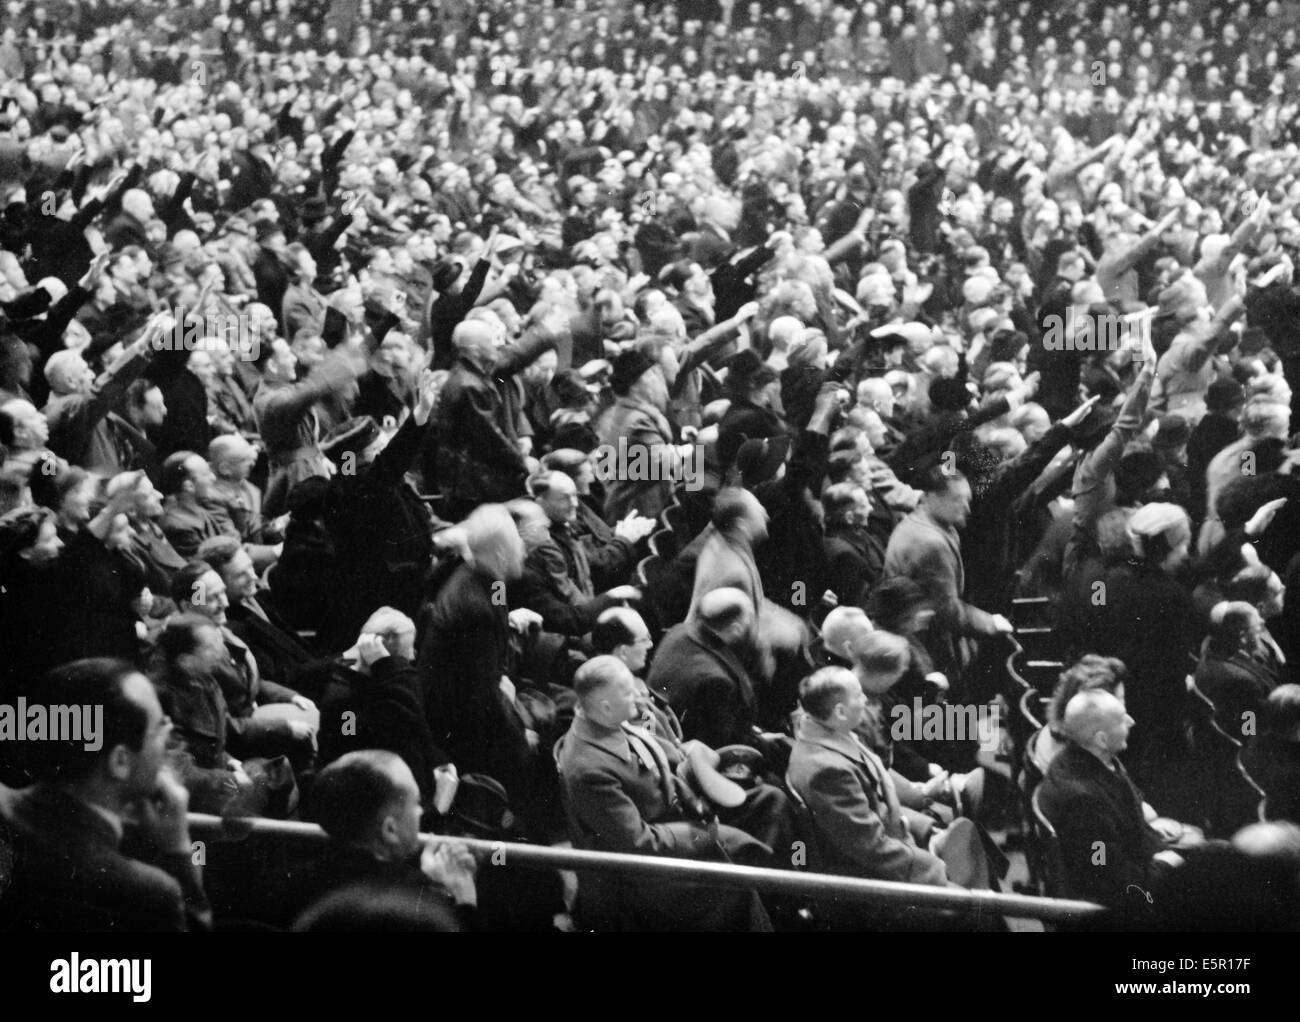 A large group of people listen to the speech by Propaganda Minister Joseph Goebbels, who called for 'total war' at the Sportpalast in Berlin, Germany, 18 February 1943. The original Nazi propaganda text on the back of the picture: 'Fanatical determination by the German people to attain final victory. At the grand rally in the Berlin Sportpalast on Thursday evening, Reich Minister Dr. Goebbels asked the German people ten meaningful questions to which the men and women expressed their willingness to work with a wild passion to attain the final victory in a stormy way.' Photo: Berliner Verlag / A Stock Photo